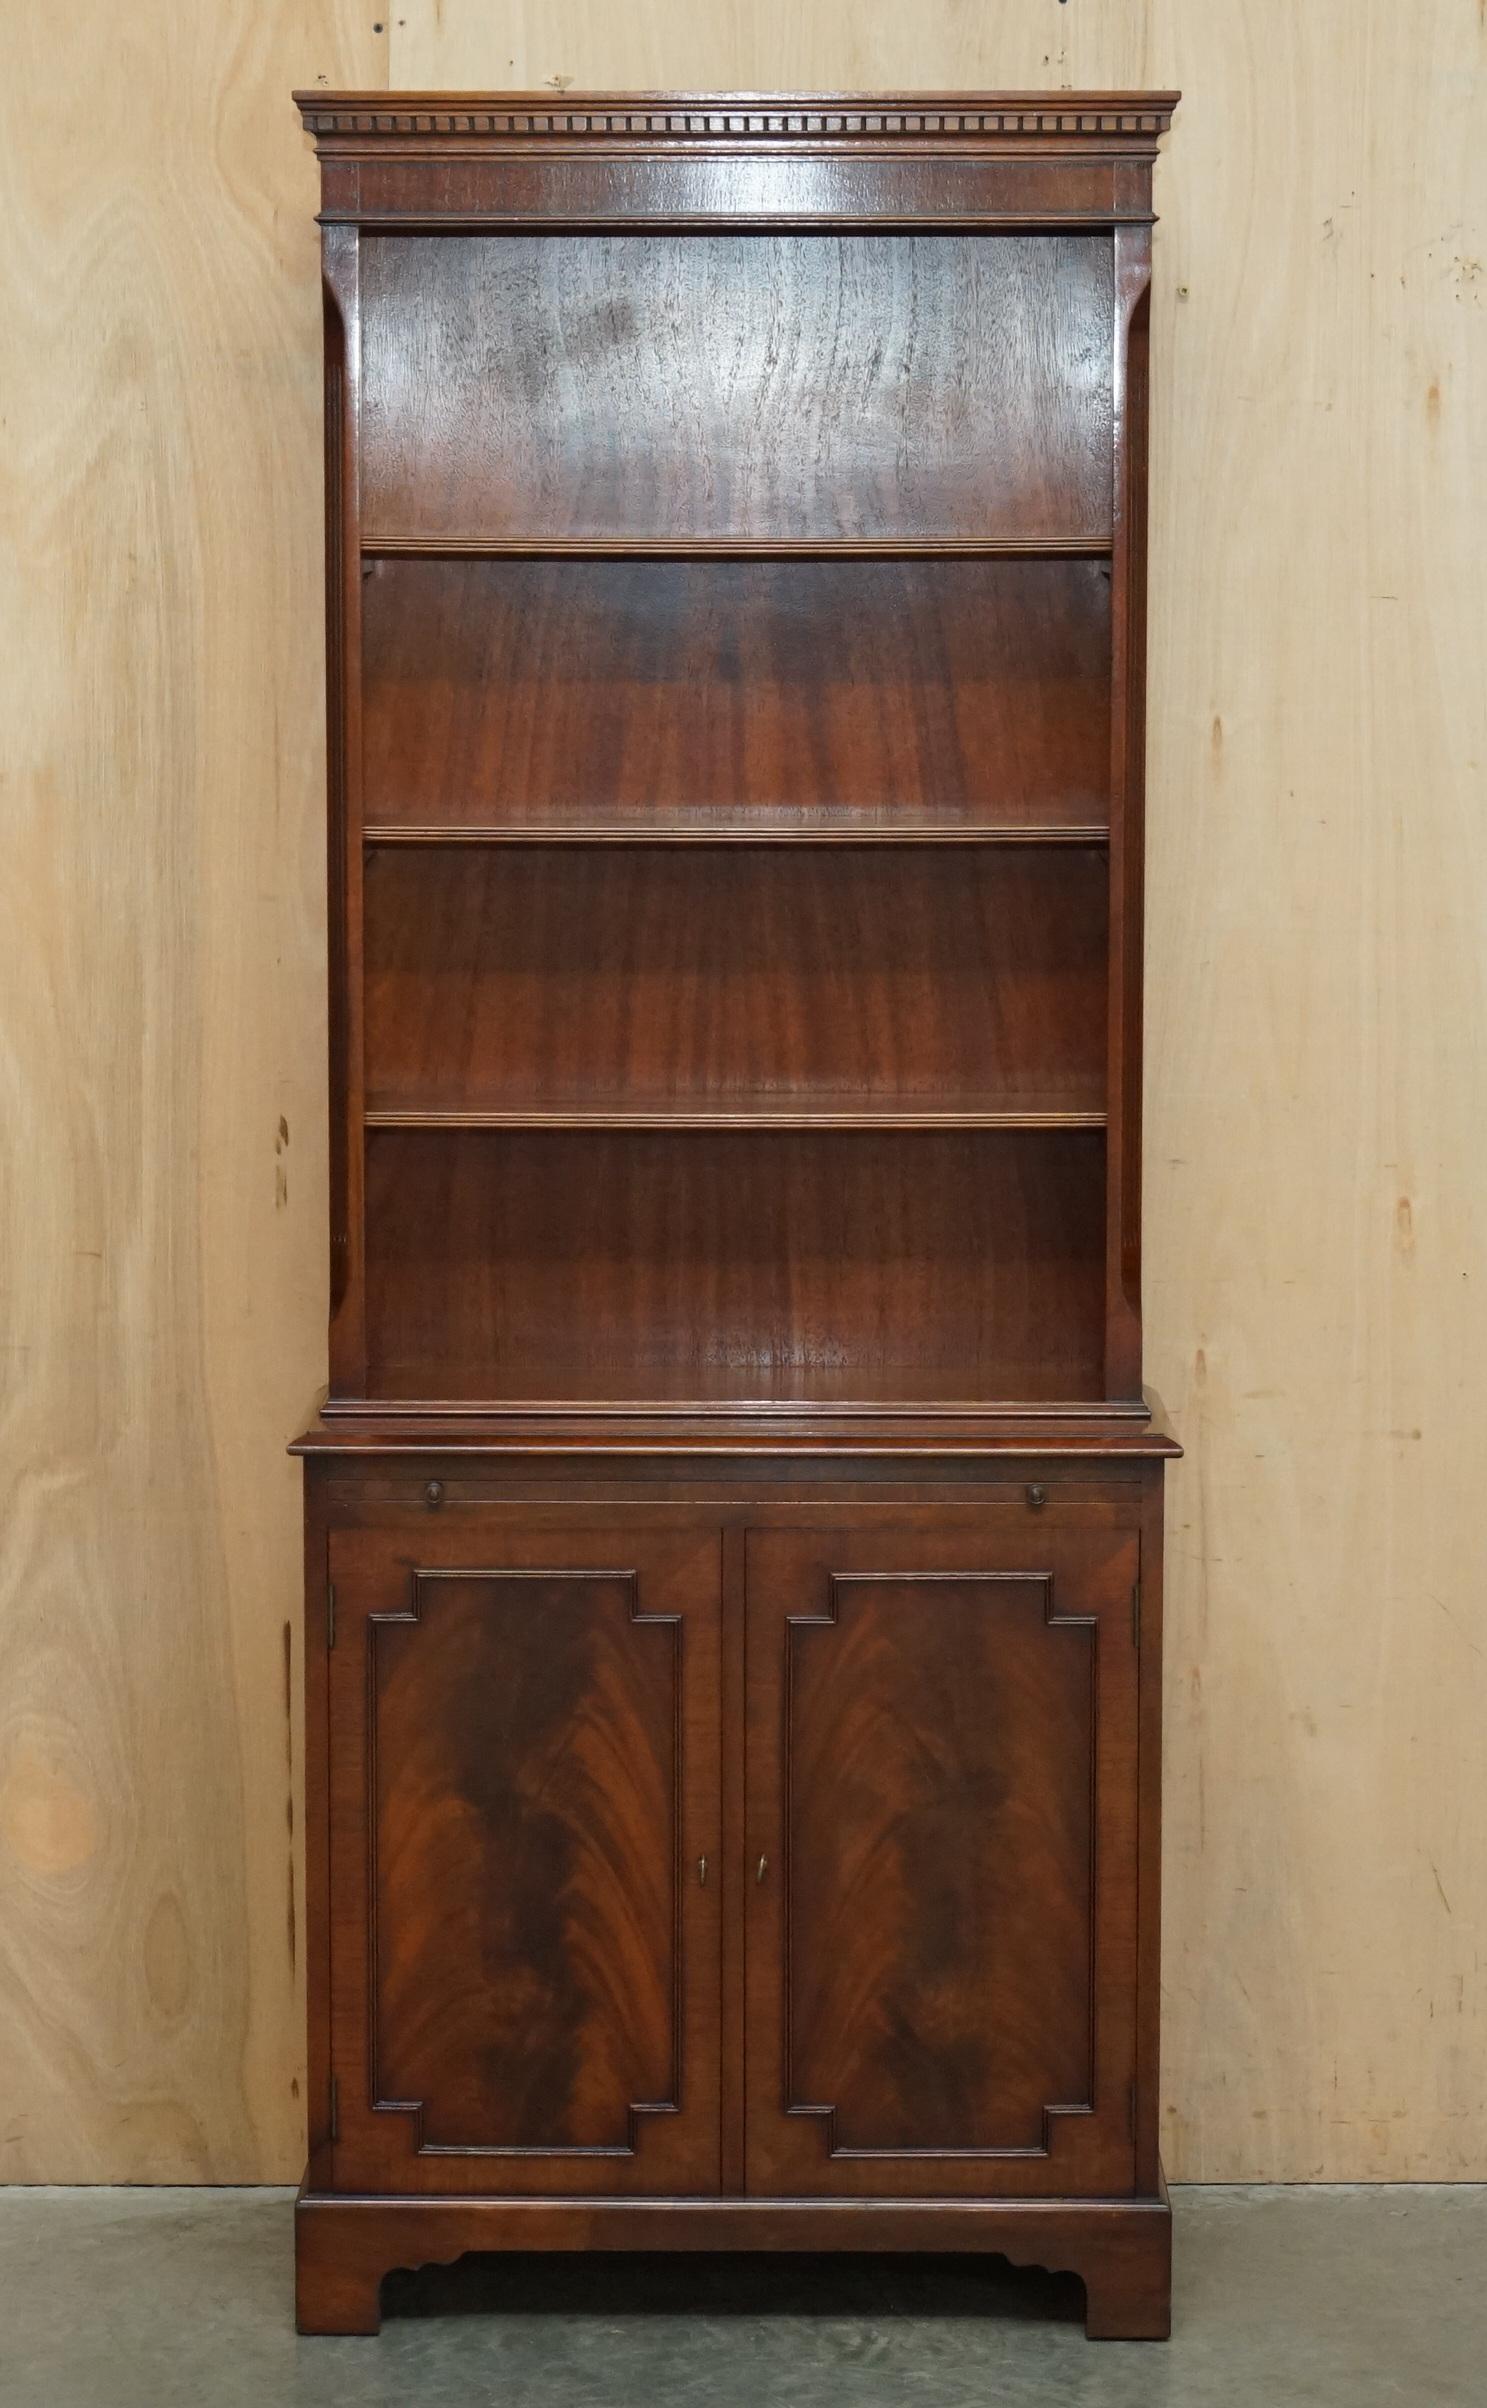 EXQUISITE PAIR OF FLAMED HARDWOOD LIBRARY BOOKCASES SLIP DRiNKS SERVING SHELVES 9